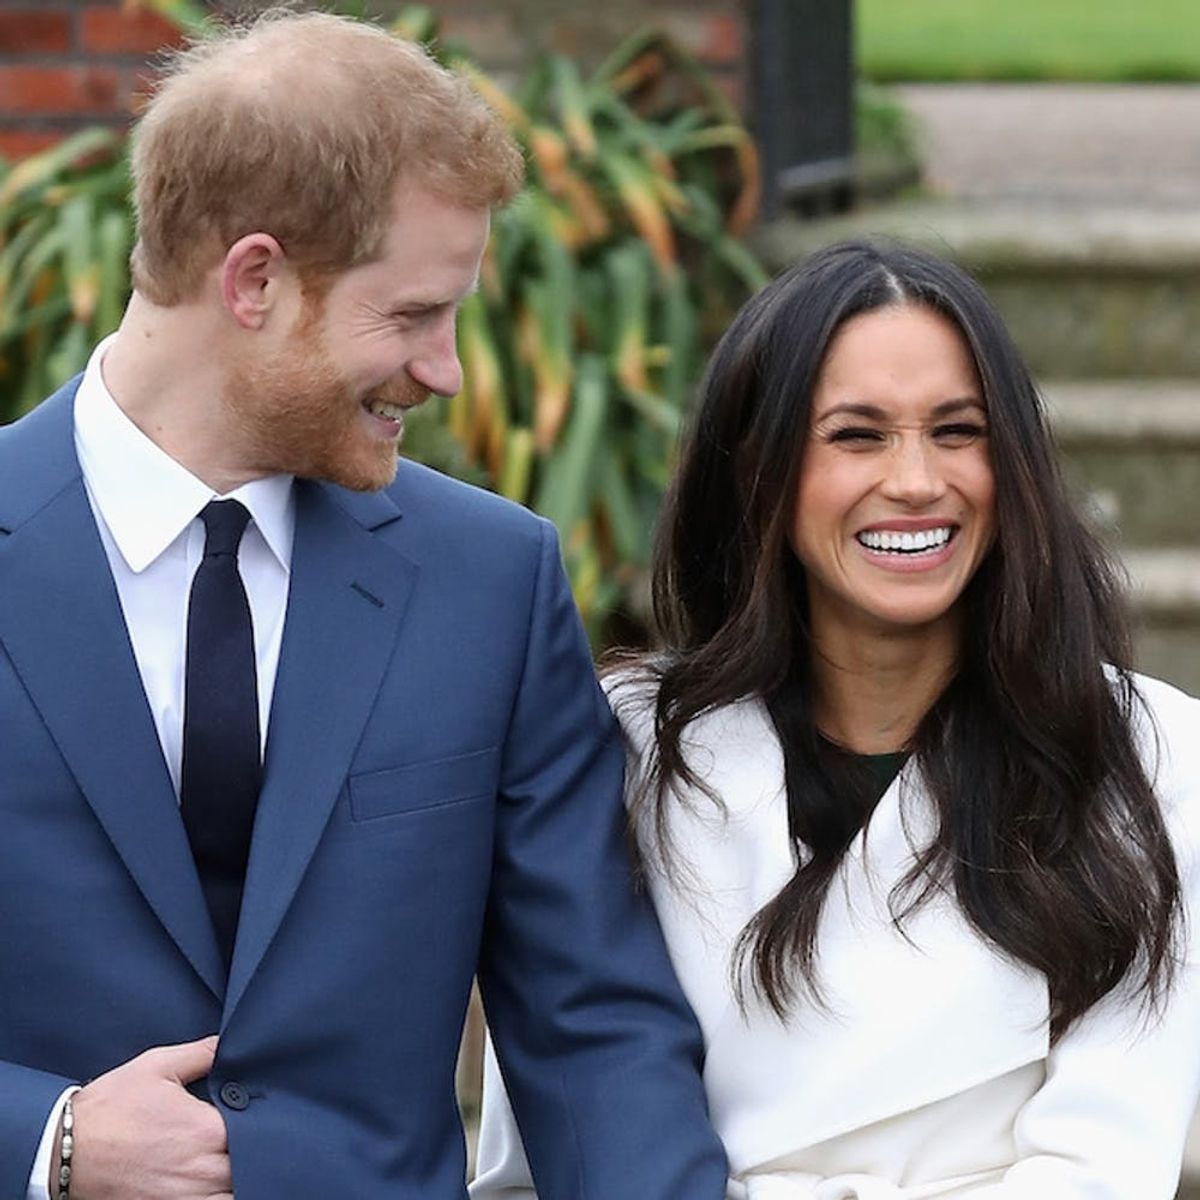 Prince Harry and Meghan Markle’s 15 Sweetest Quotes About Their Relationship